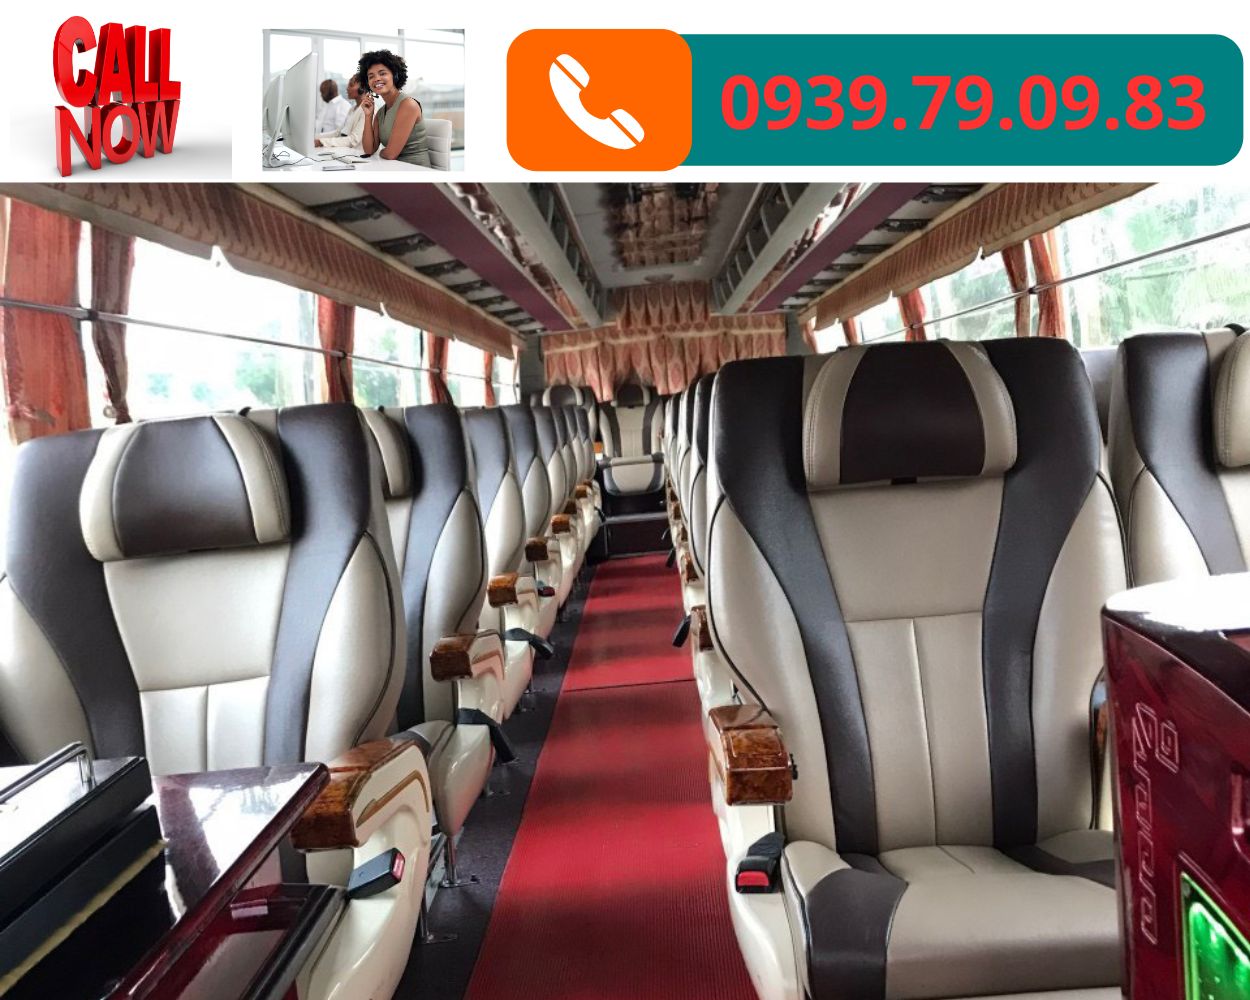 Limousine 28 seats - The perfect choice for travel